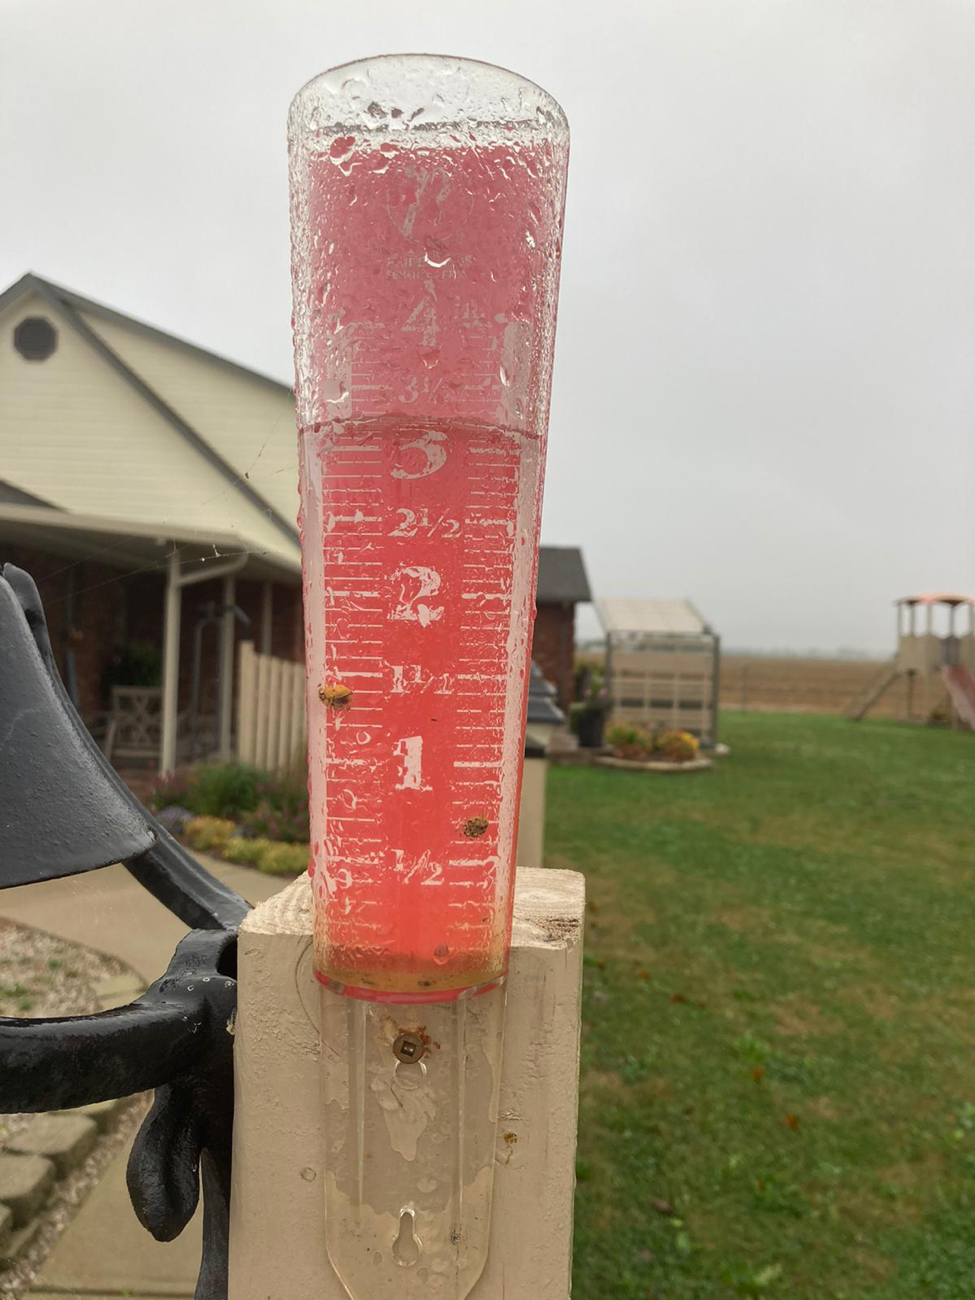 Sept 23 had 3” of rain … time to look at